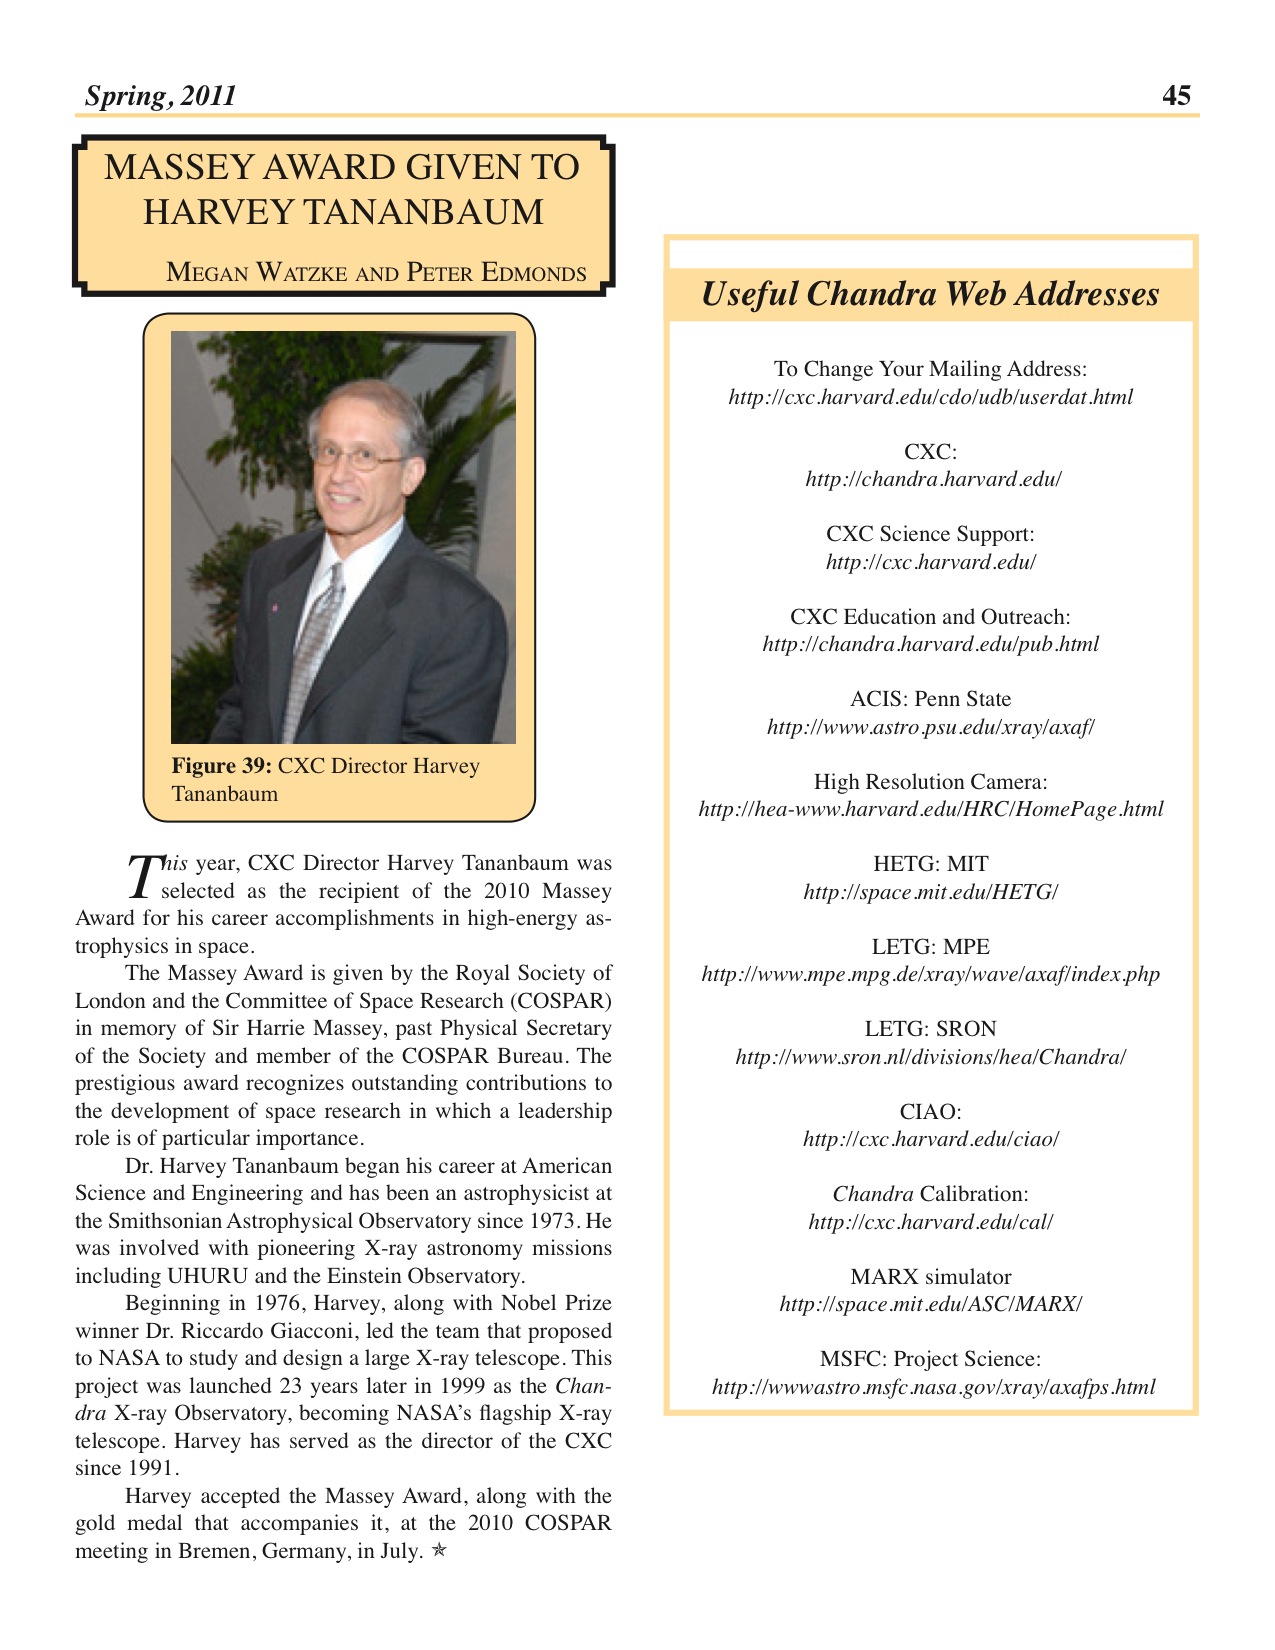 Page 45 of the Chandra Newsletter, issue 18.